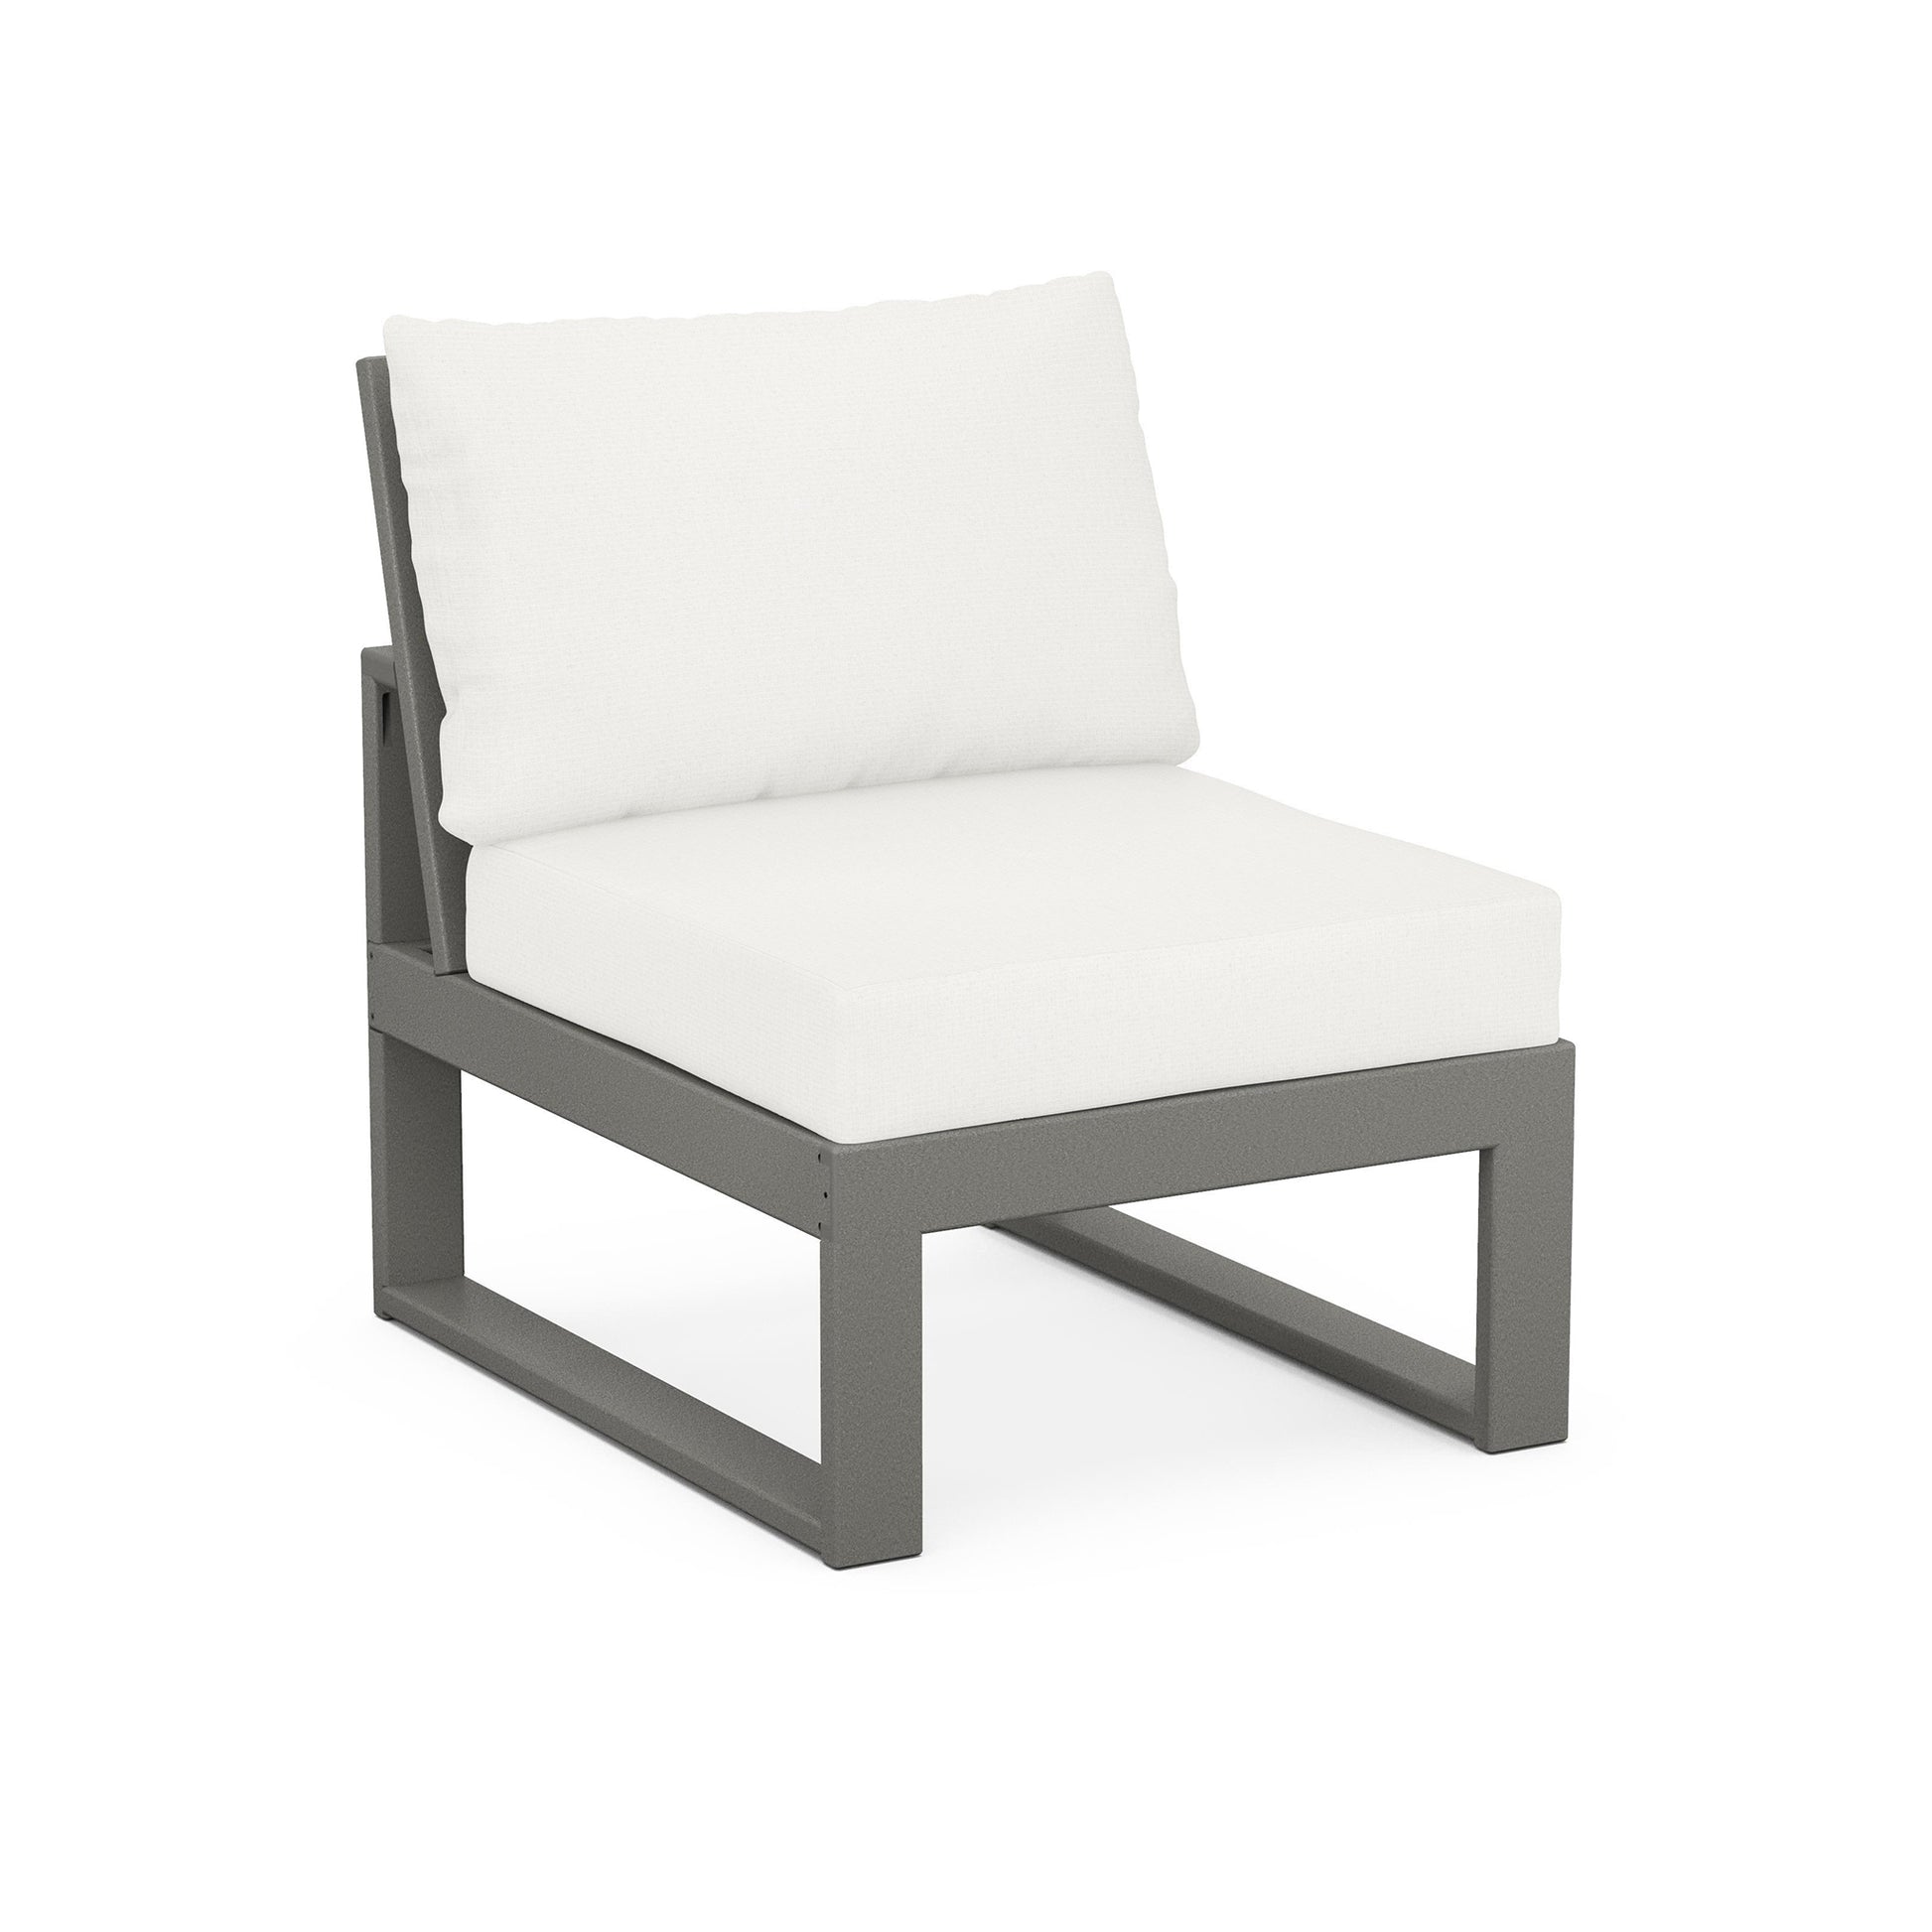 A modern POLYWOOD® Modular Armless Chair with a gray frame and thick, white cushions. The chair is set against a plain, light background, highlighting its sleek and simple design.